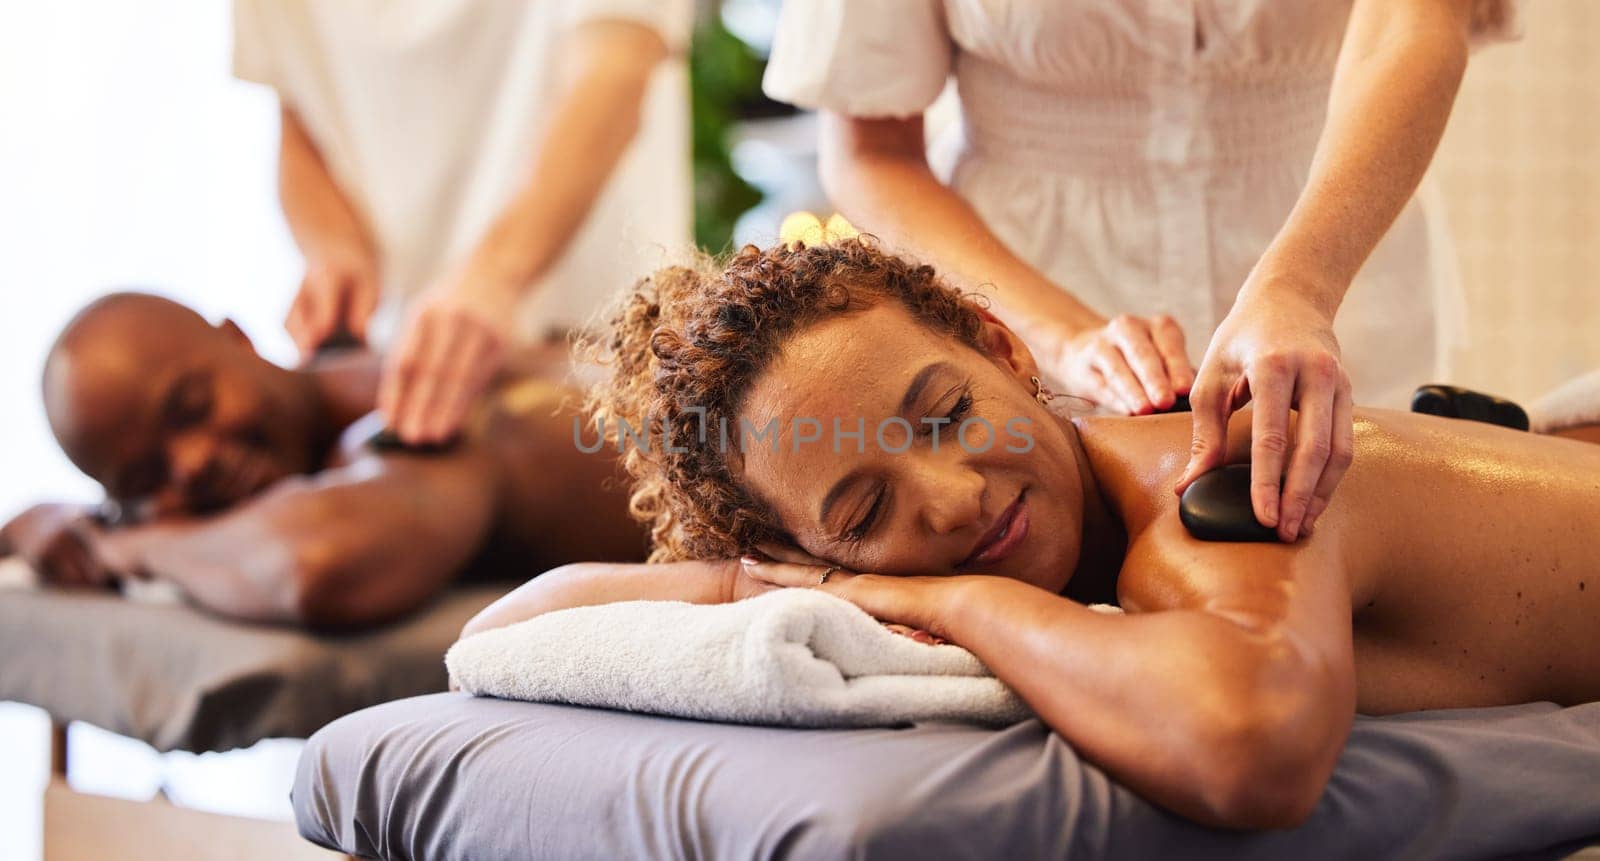 Spa, wellness and massage for couple and hot stone therapy, massage therapist hands for stress relief and body health. Man and woman relax with luxury service at beauty salon, peace and detox release by YuriArcurs